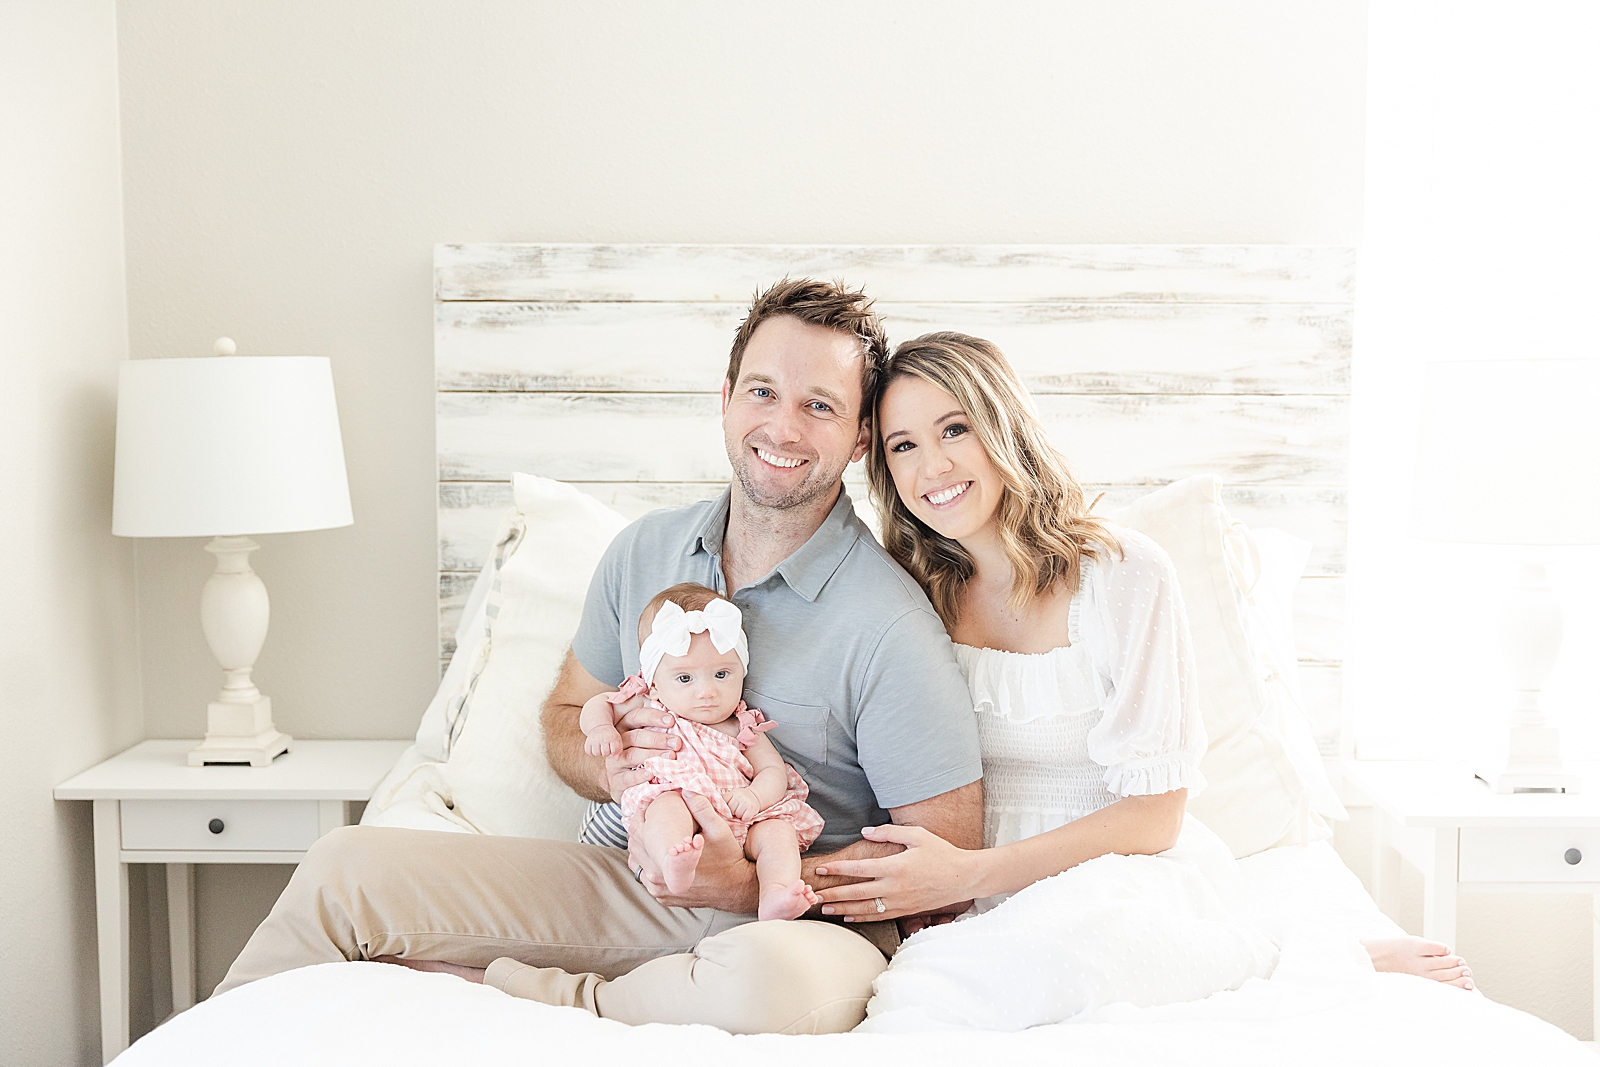 Lifestyle Newborn Photos mom and dad sitting on bet smiling with baby in pink romper and white bow